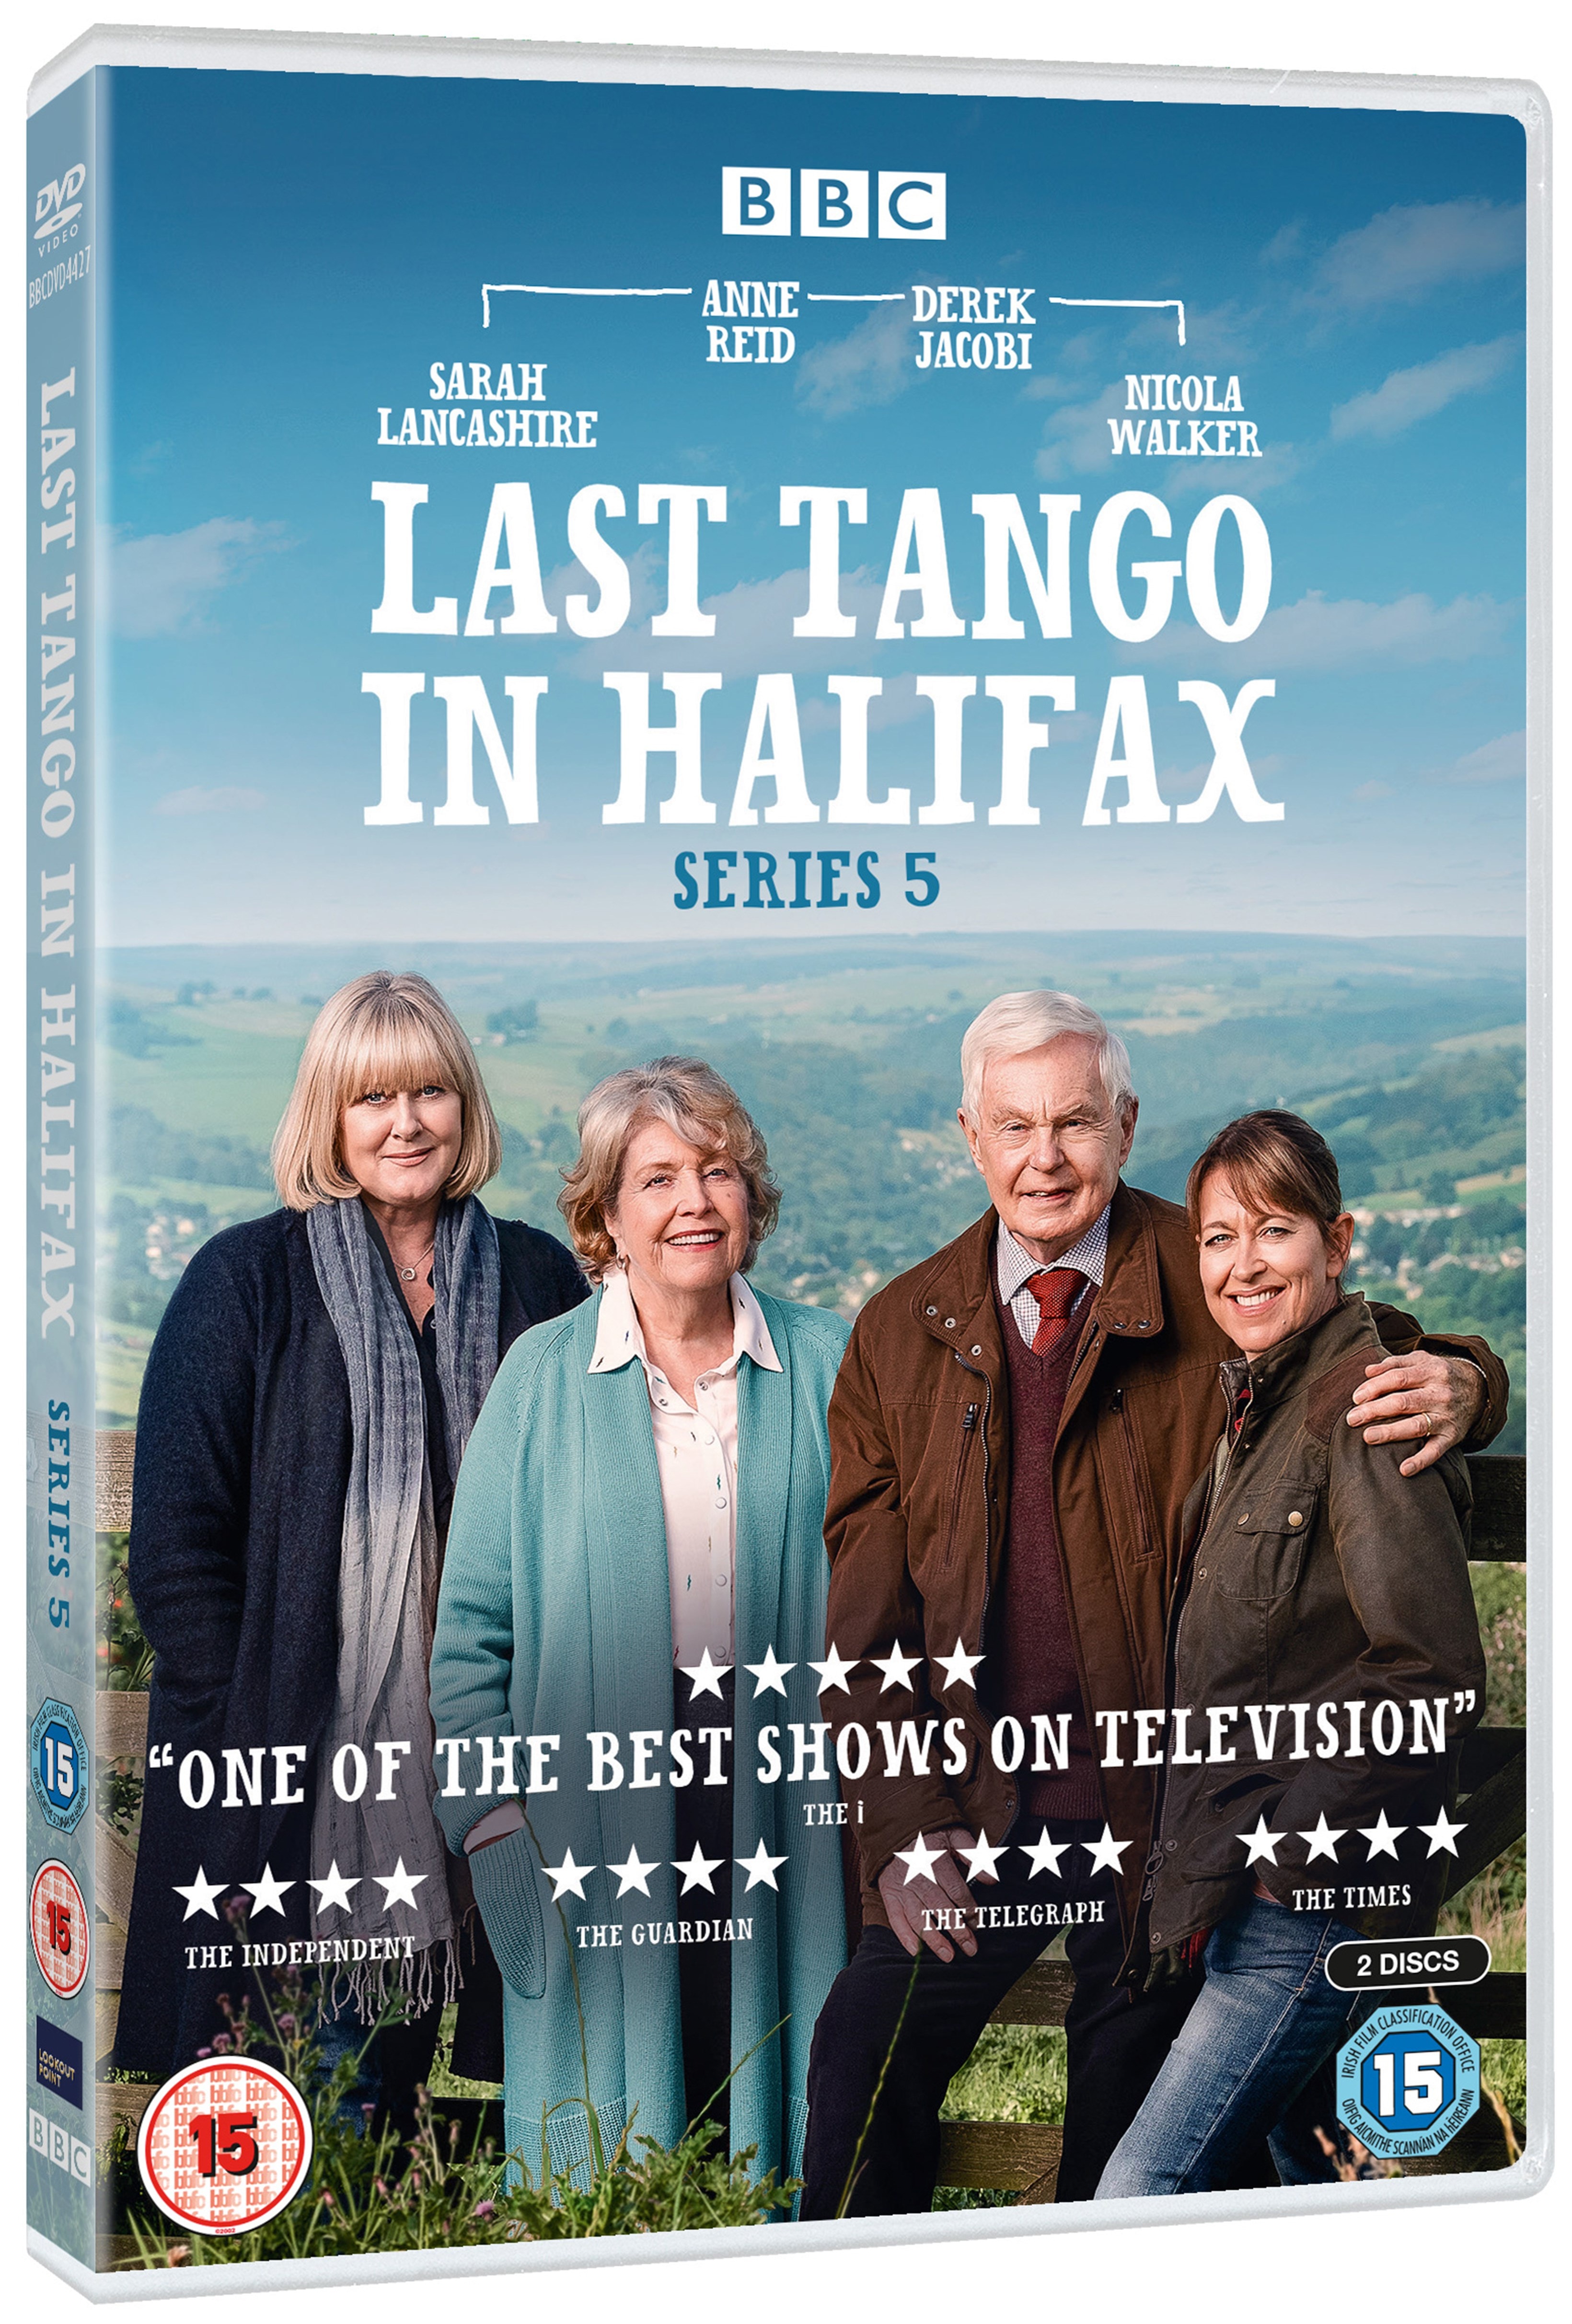 Last Tango In Halifax Series 5 Dvd Free Shipping Over £20 Hmv Store